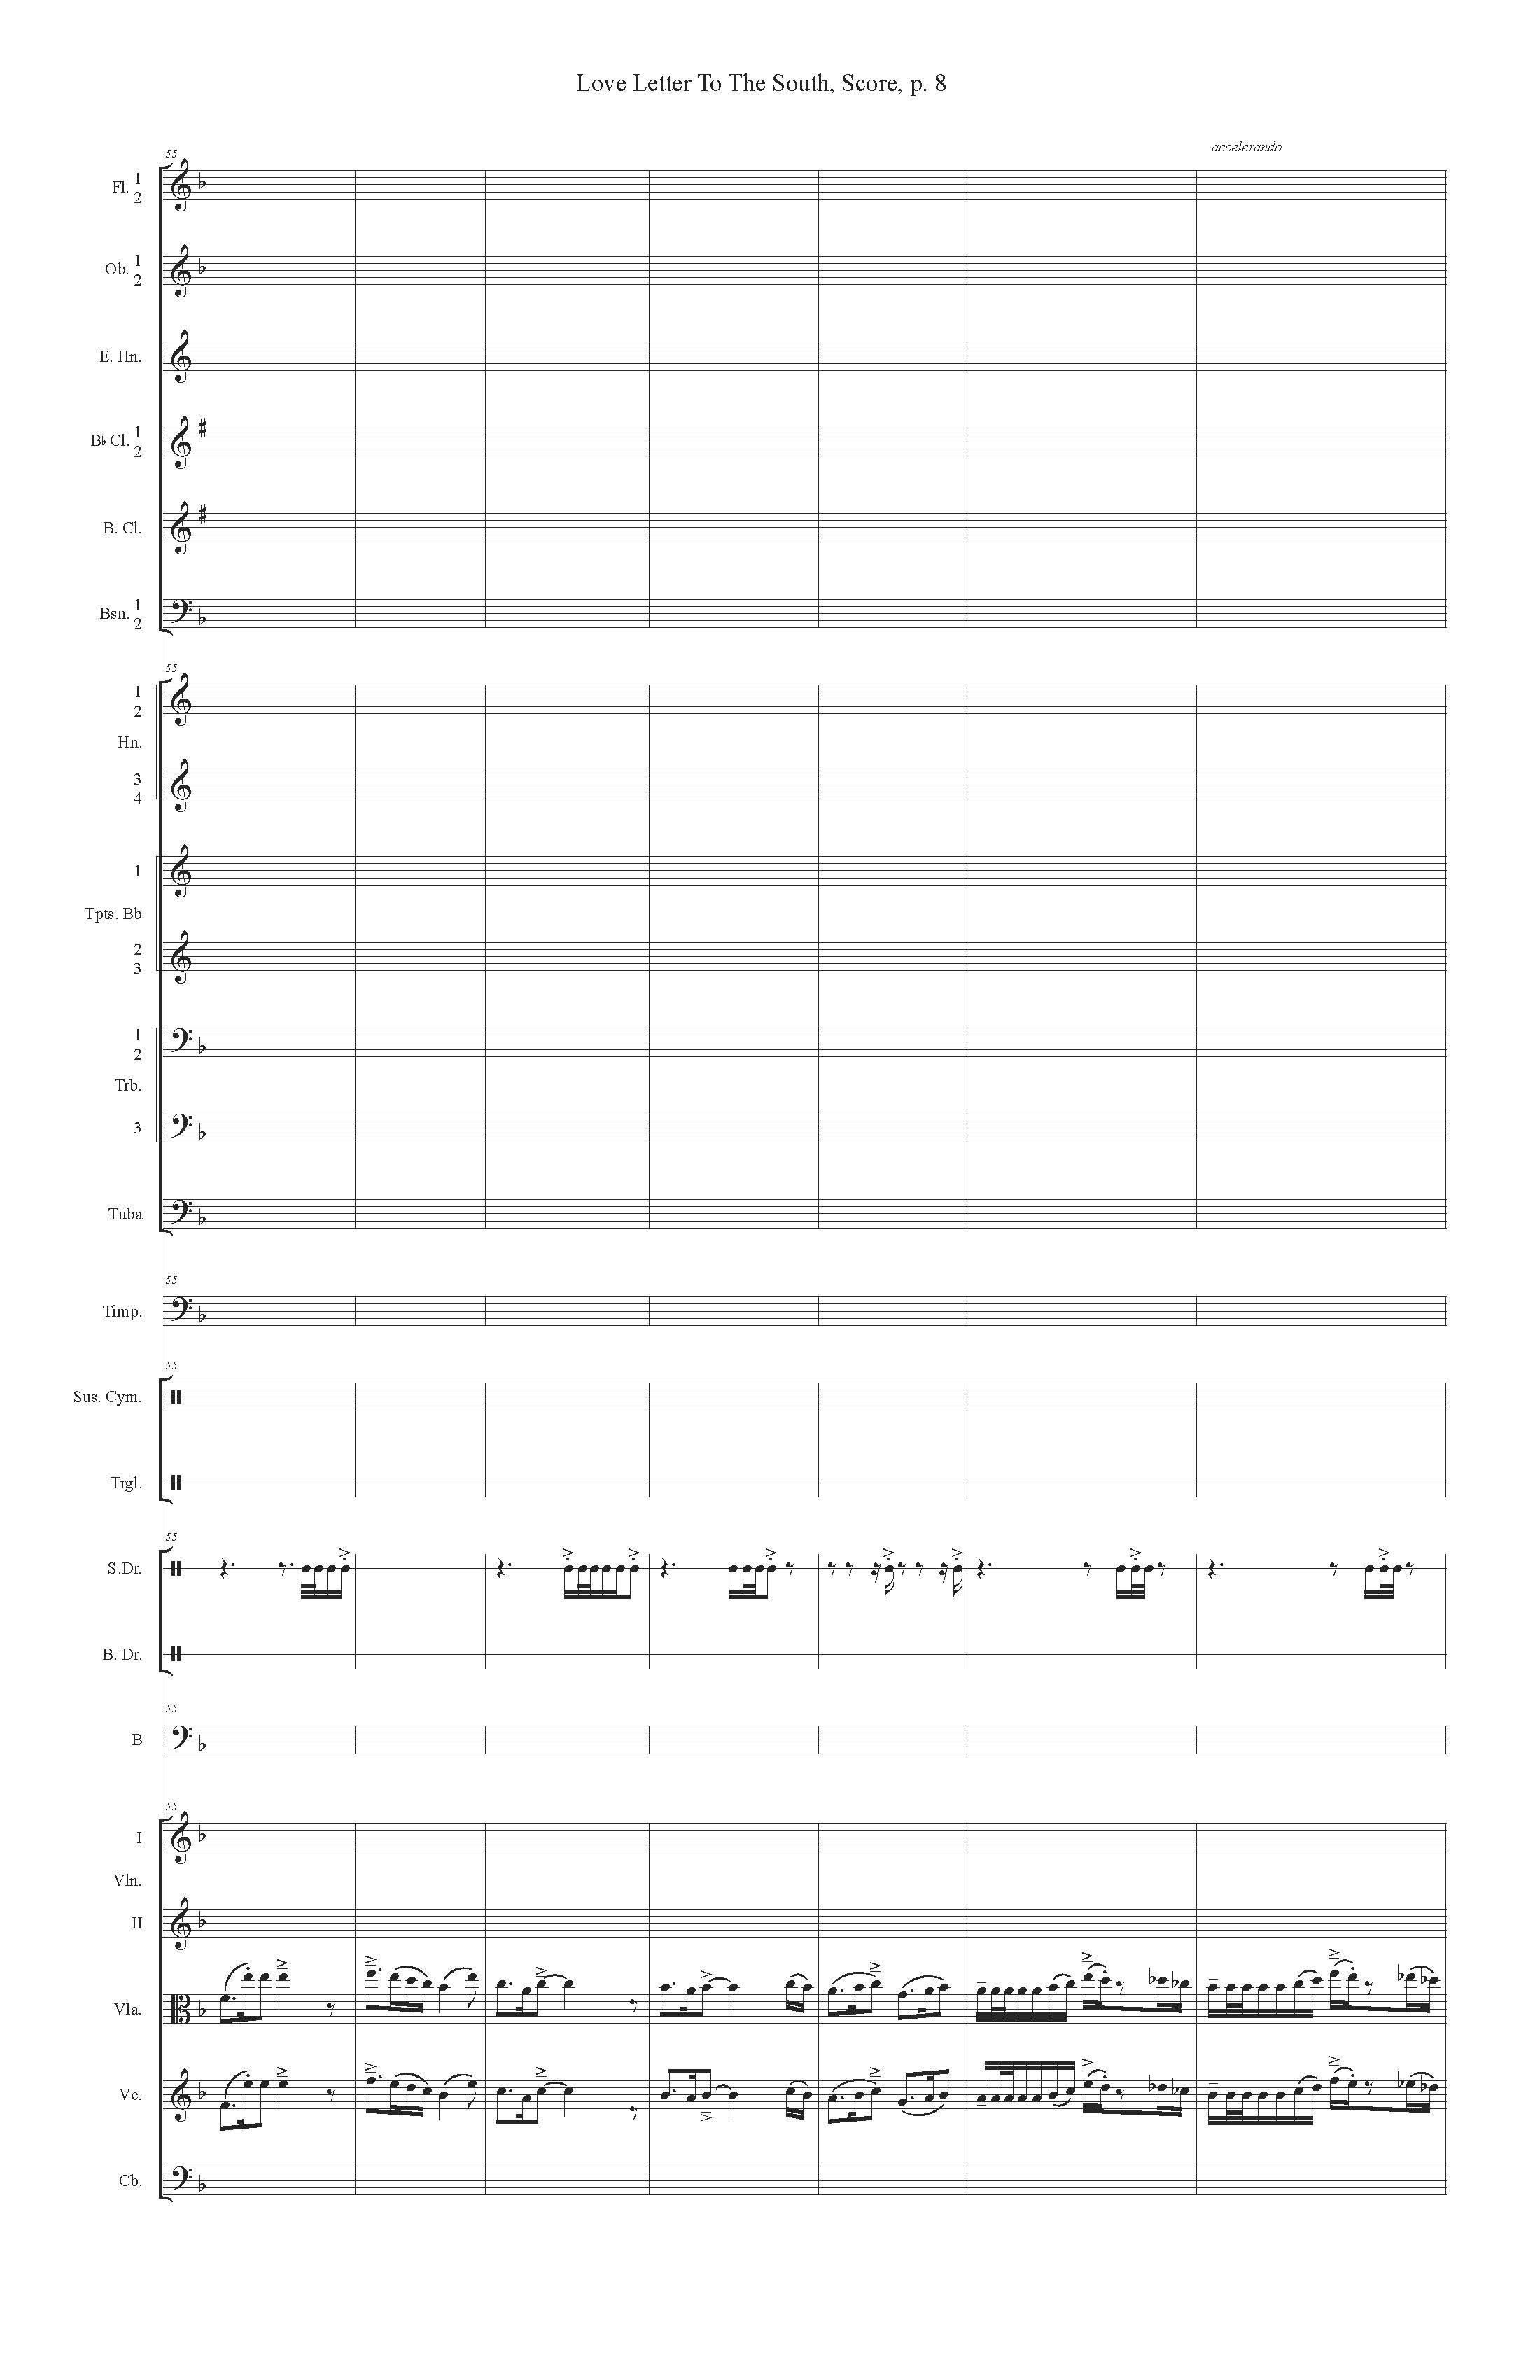 LOVE LETTER TO THE SOUTH ORCH - Score_Page_08.jpg